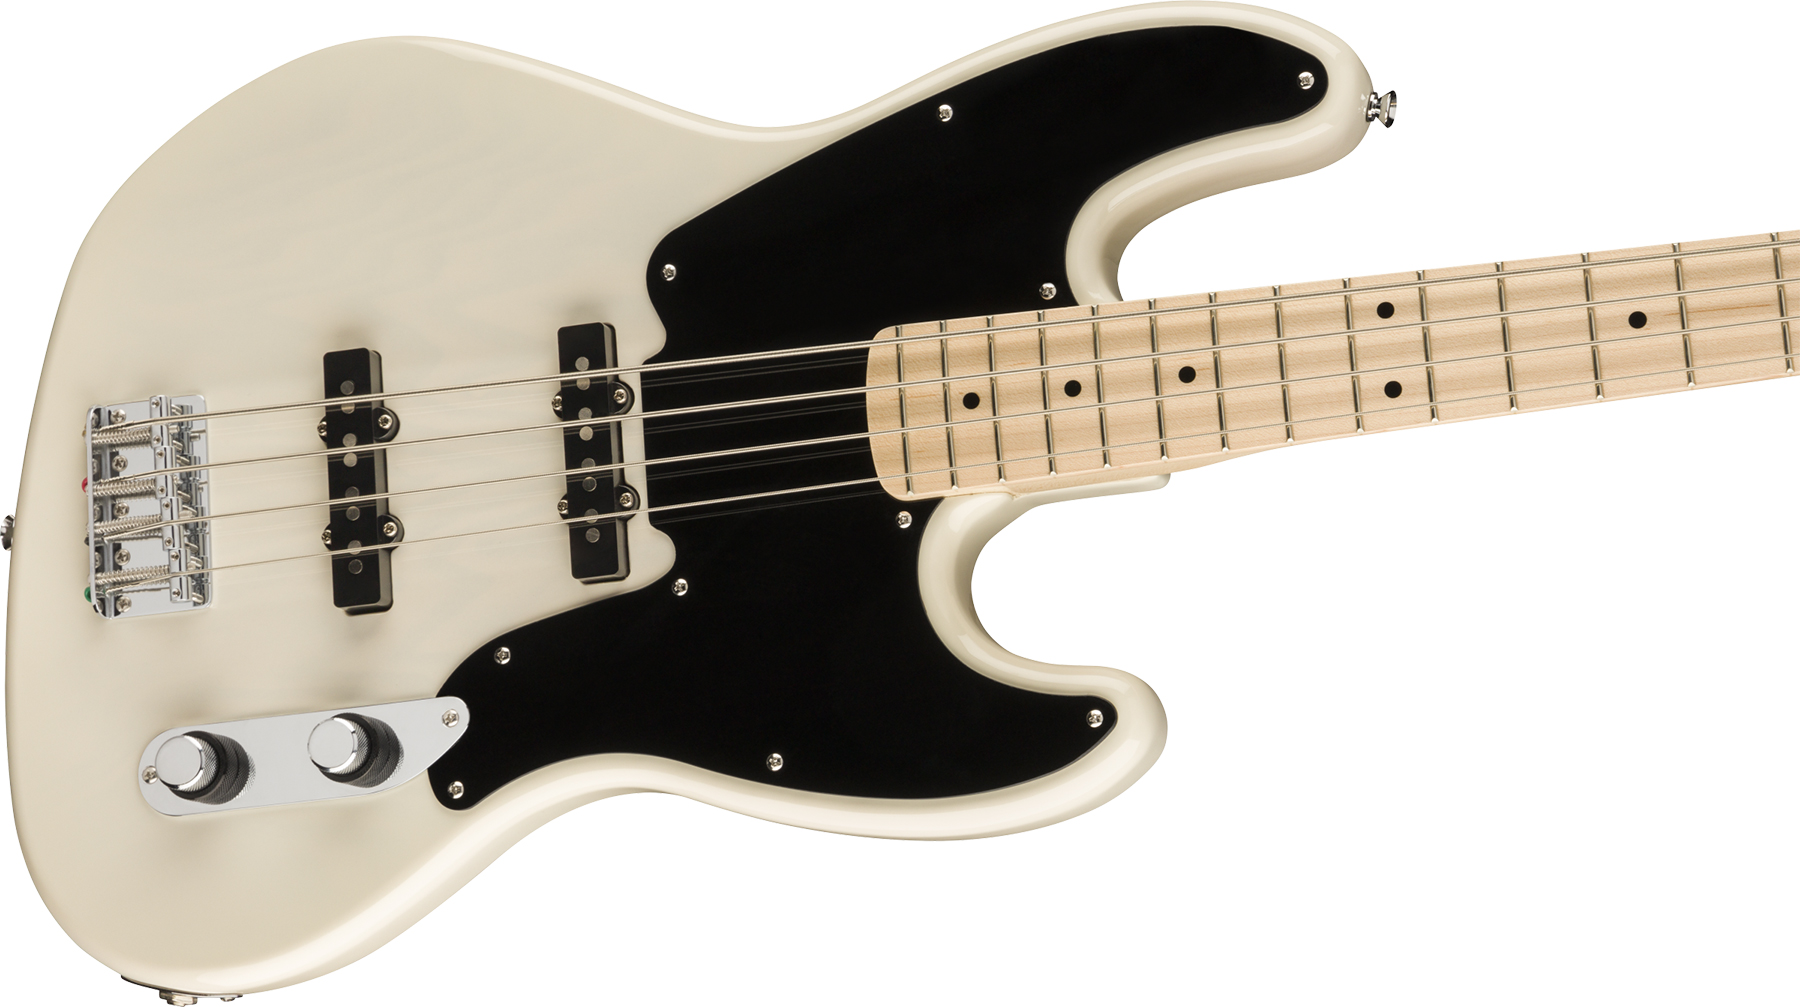 Squier Jazz Bass 1954 Paranormal Mn - White Blonde - Basse Électrique Solid Body - Variation 2